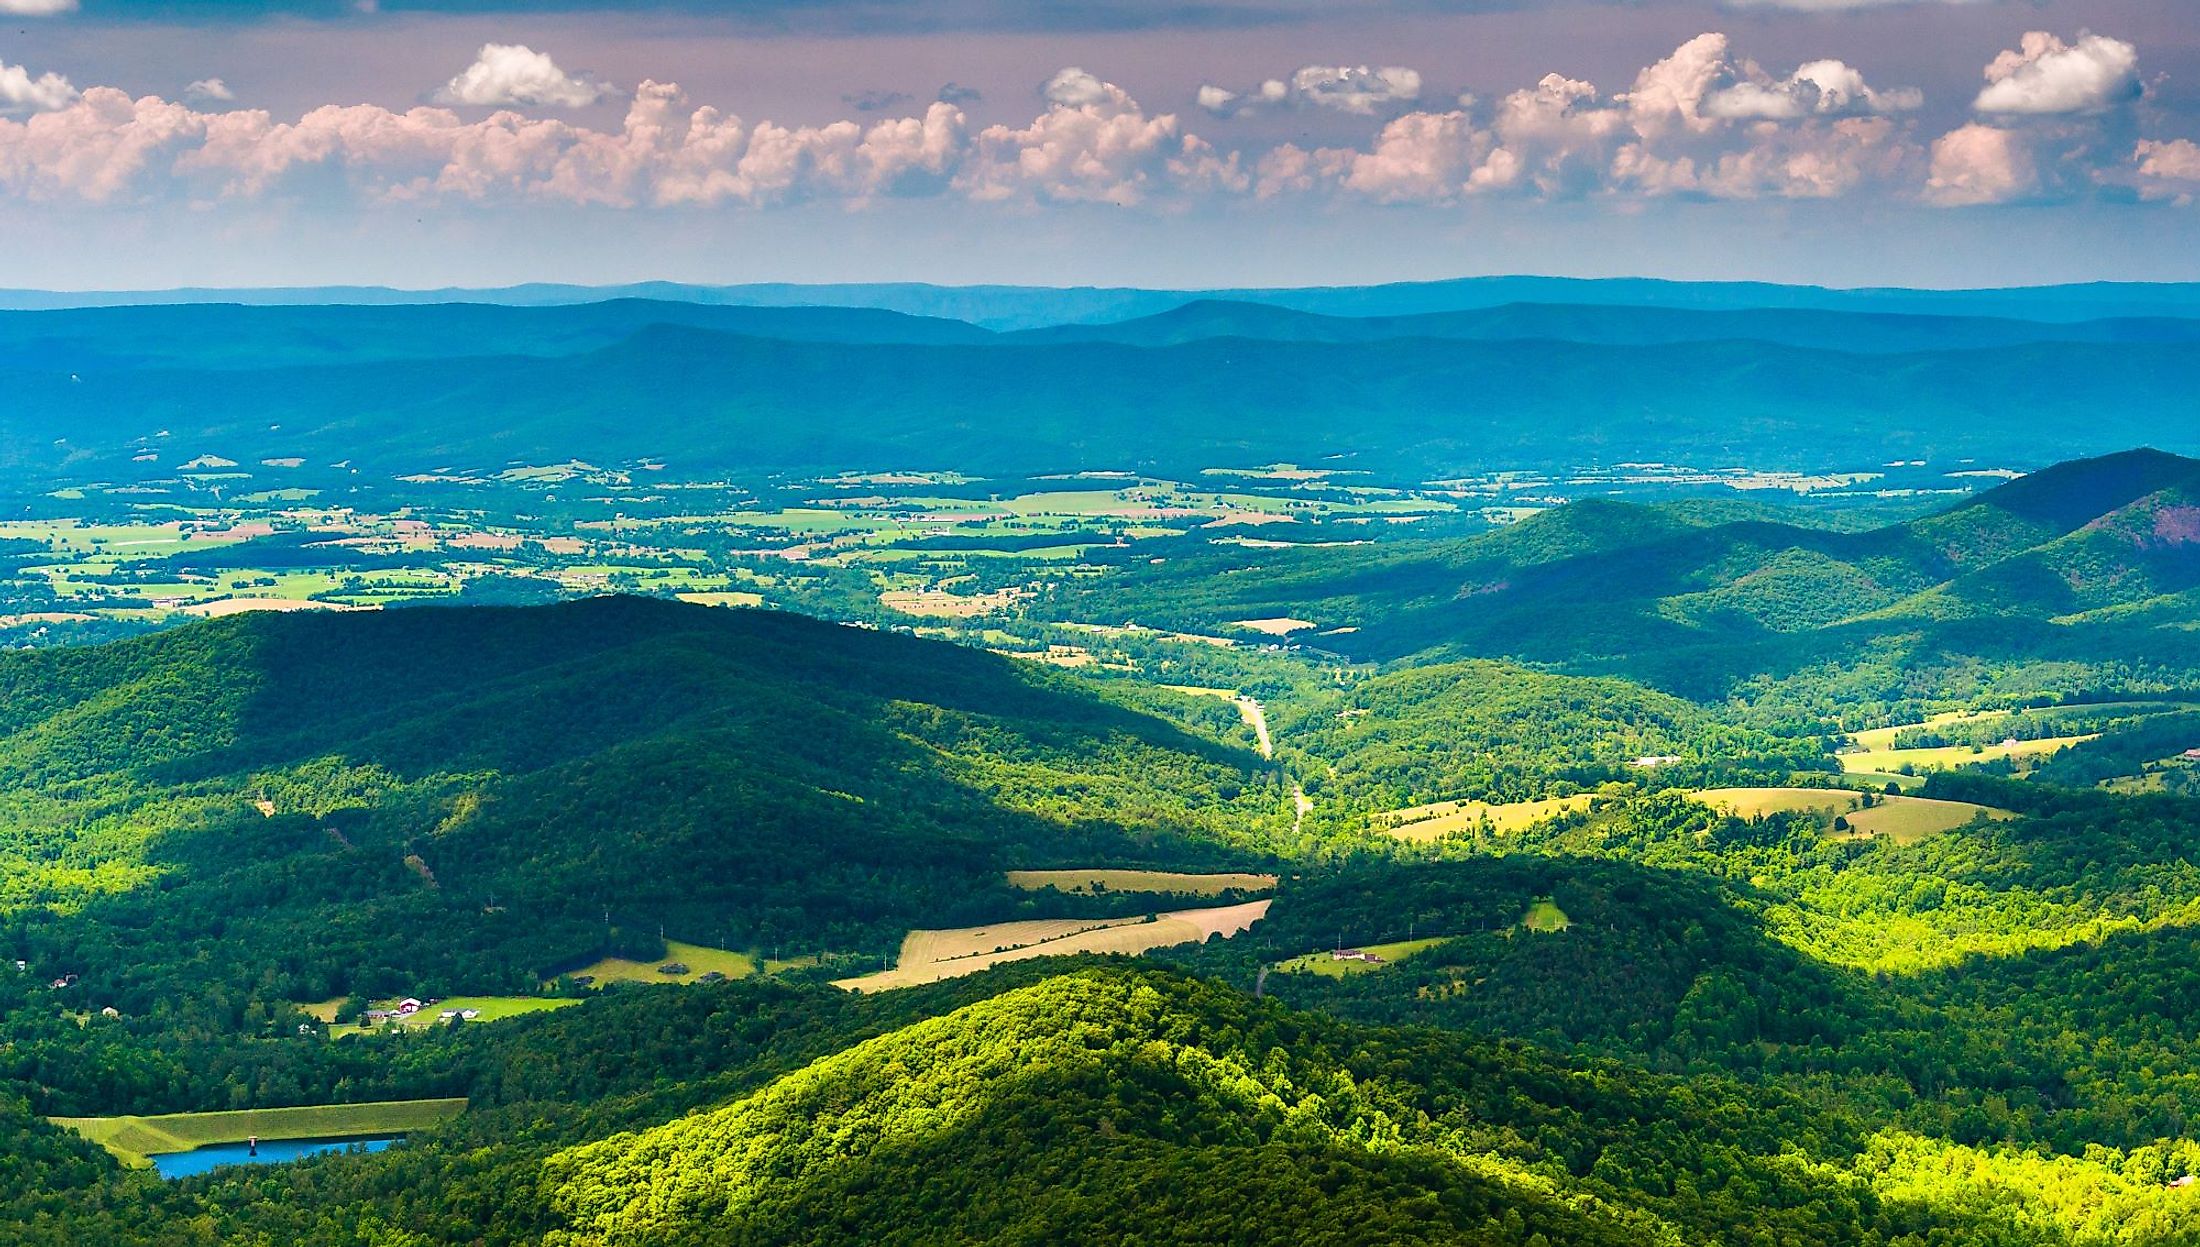 Clouds cast shadows over the Blue Ridge Mountains and Shenandoah Valley, seen from Shenandoah National Park, Virginia